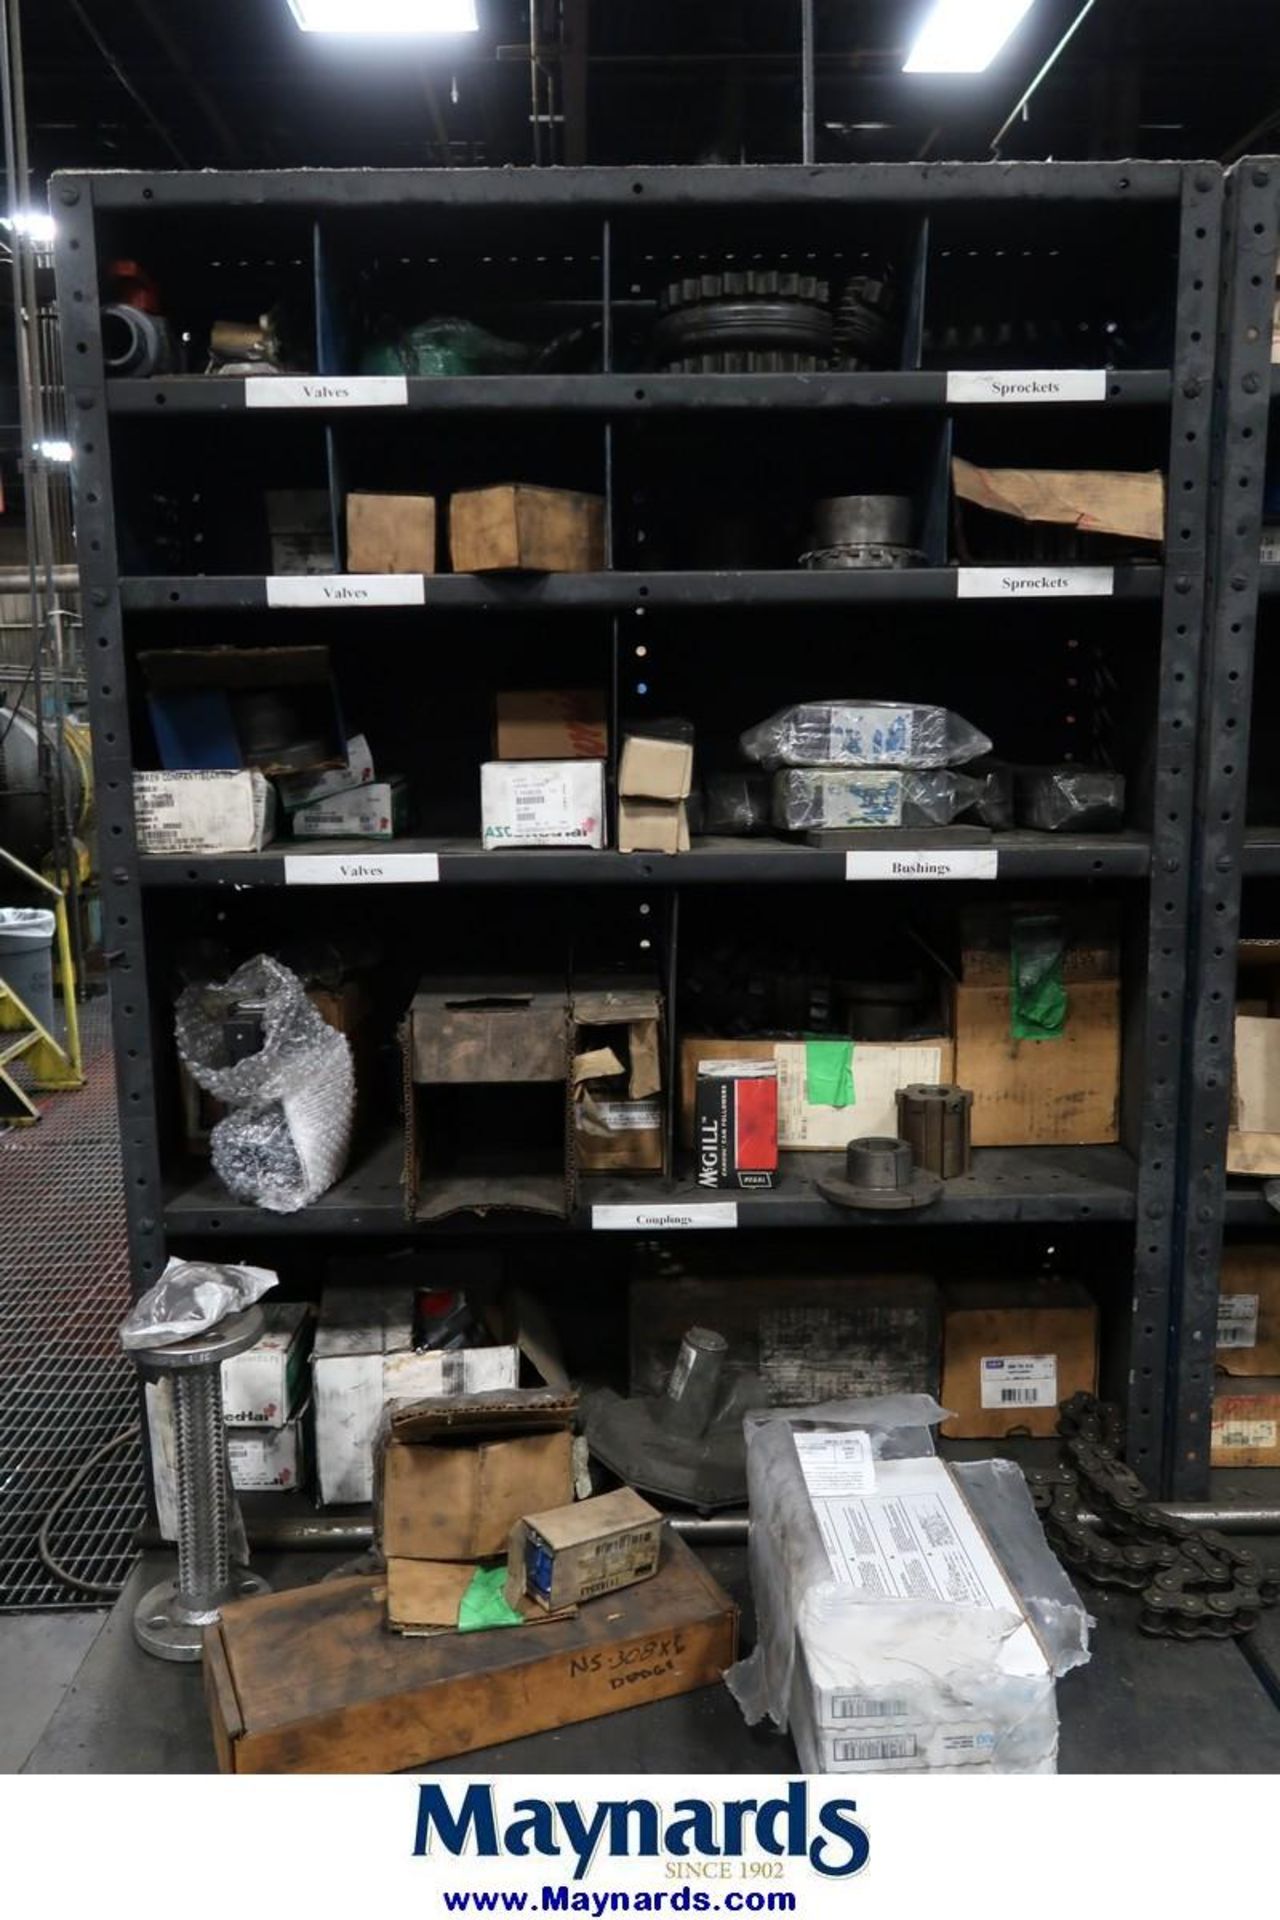 Adjustable Steel Shelving Units with Contents of Heat Treat Spare Parts - Image 13 of 16